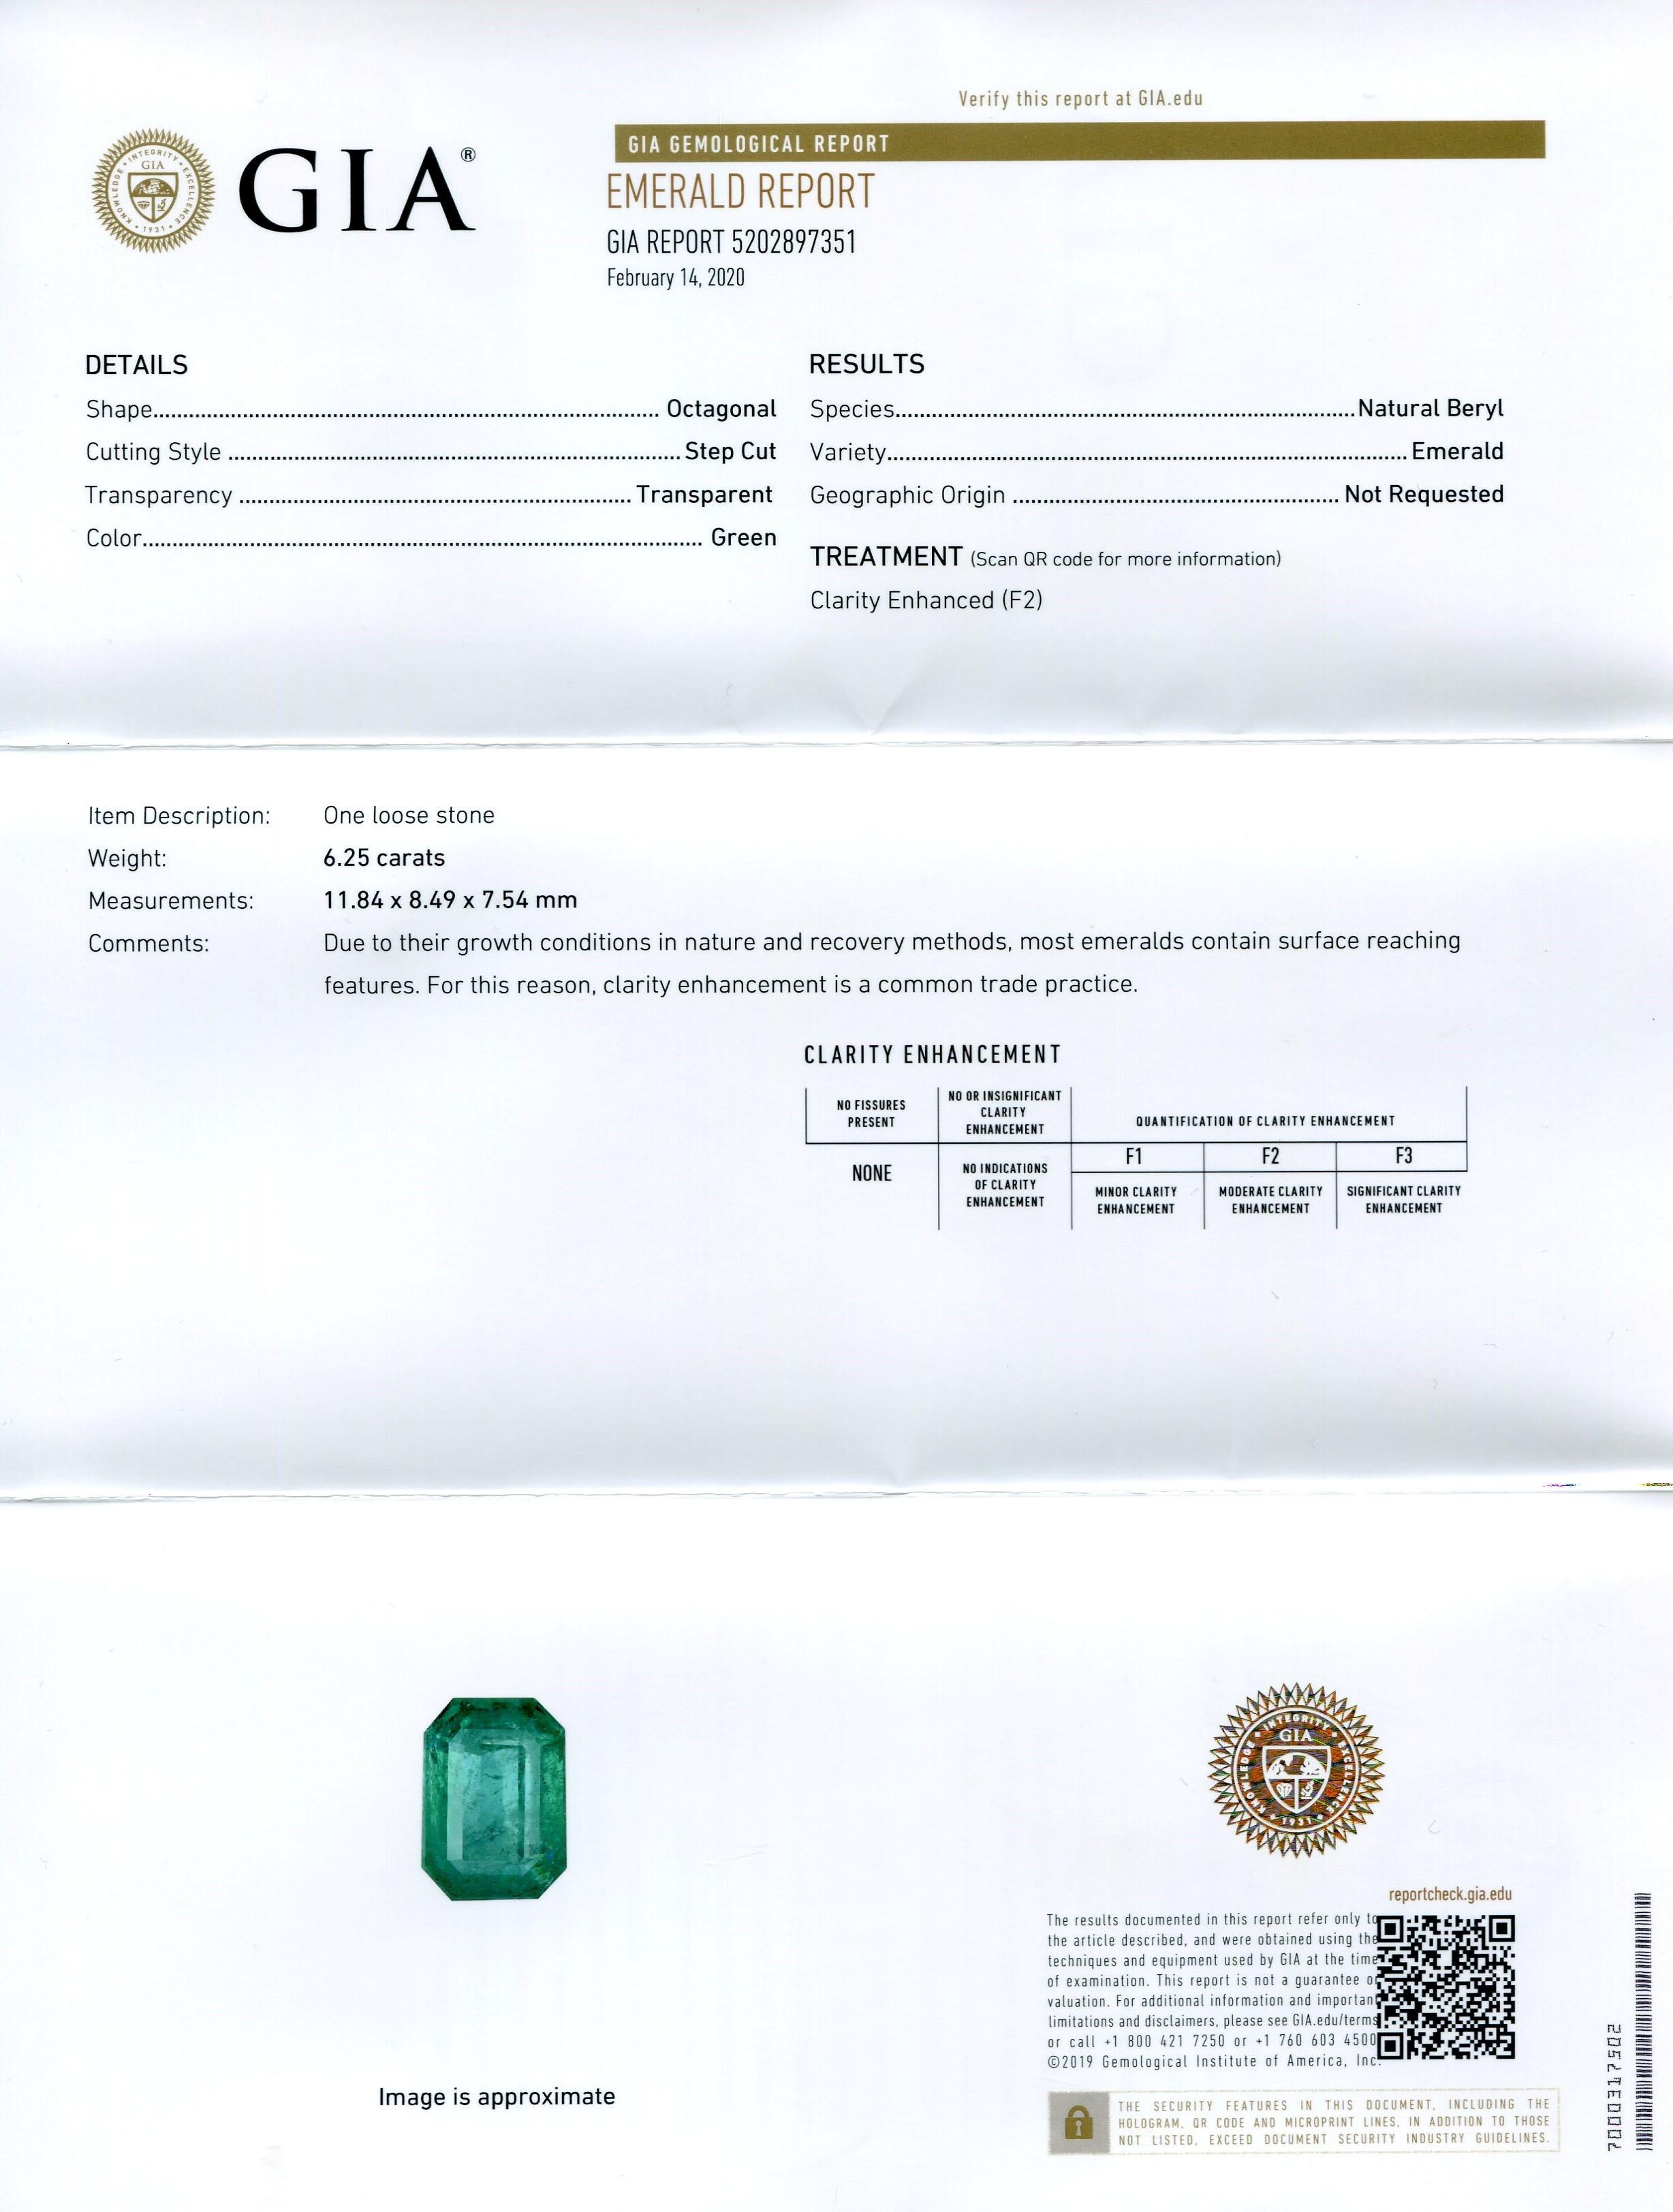 This is a stunning GIA Certified Emerald 

The GIA report reads as follows:

GIA Report Number: 5202897351
Shape: Octagonal
Cutting Style: Step Cut
Cutting Style: Crown:  
Cutting Style: Pavilion: 
Transparency: Transparent
Color: